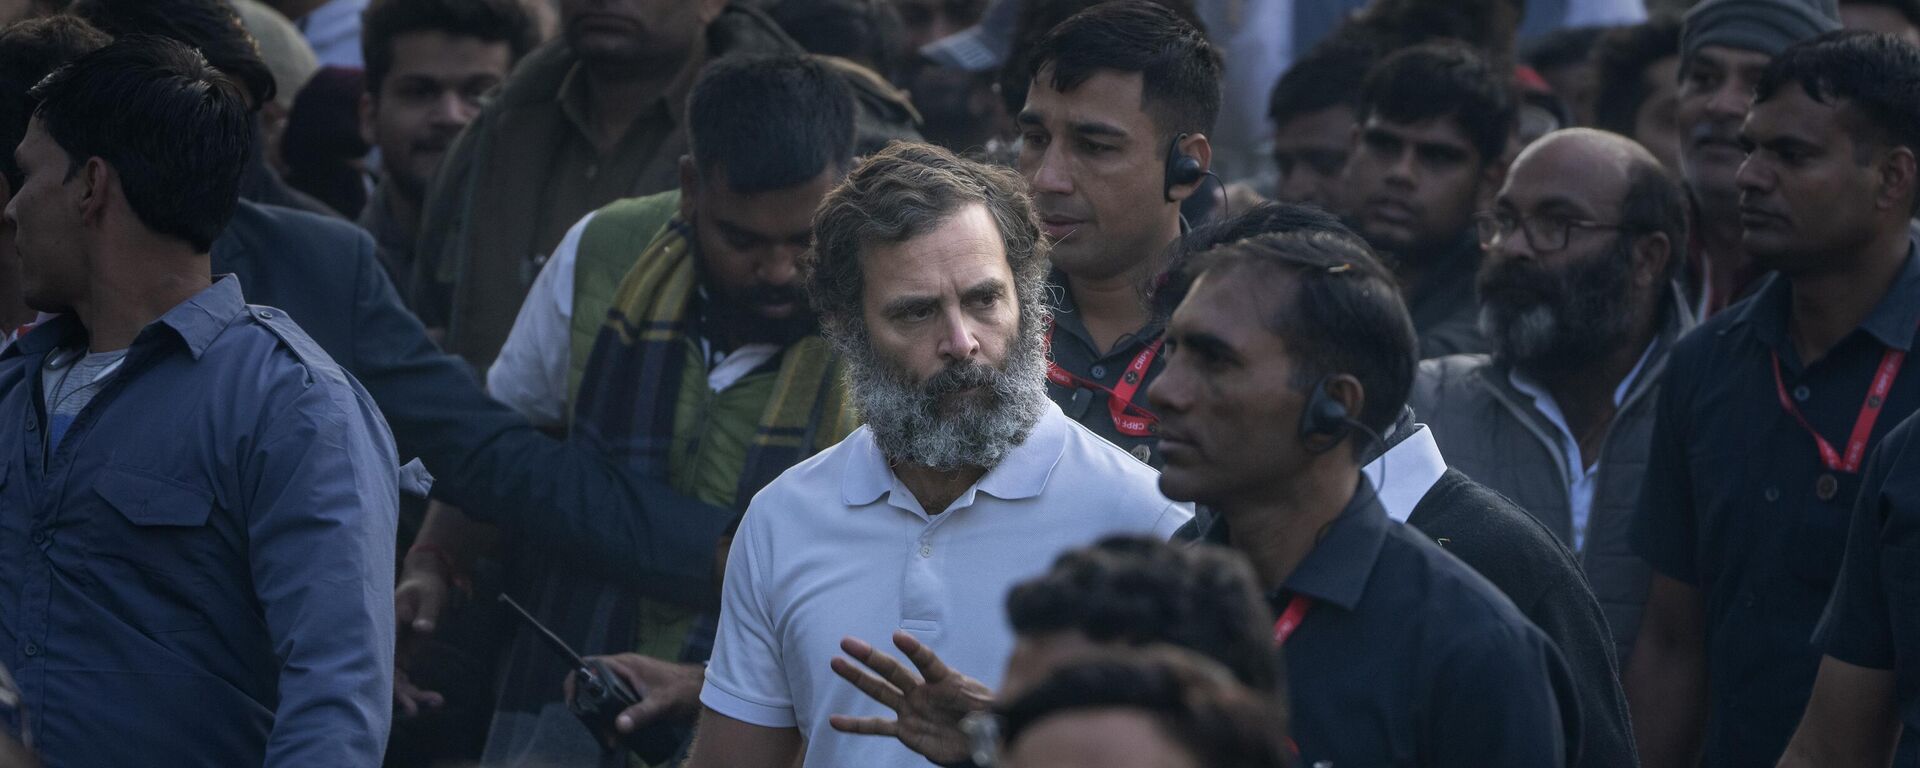 Rahul Gandhi, leader of India's opposition Congress party, centre in white T-shirt, walks with his supporters during a march, in New Delhi, India, Saturday, Dec. 24, 2022. - Sputnik India, 1920, 19.01.2023